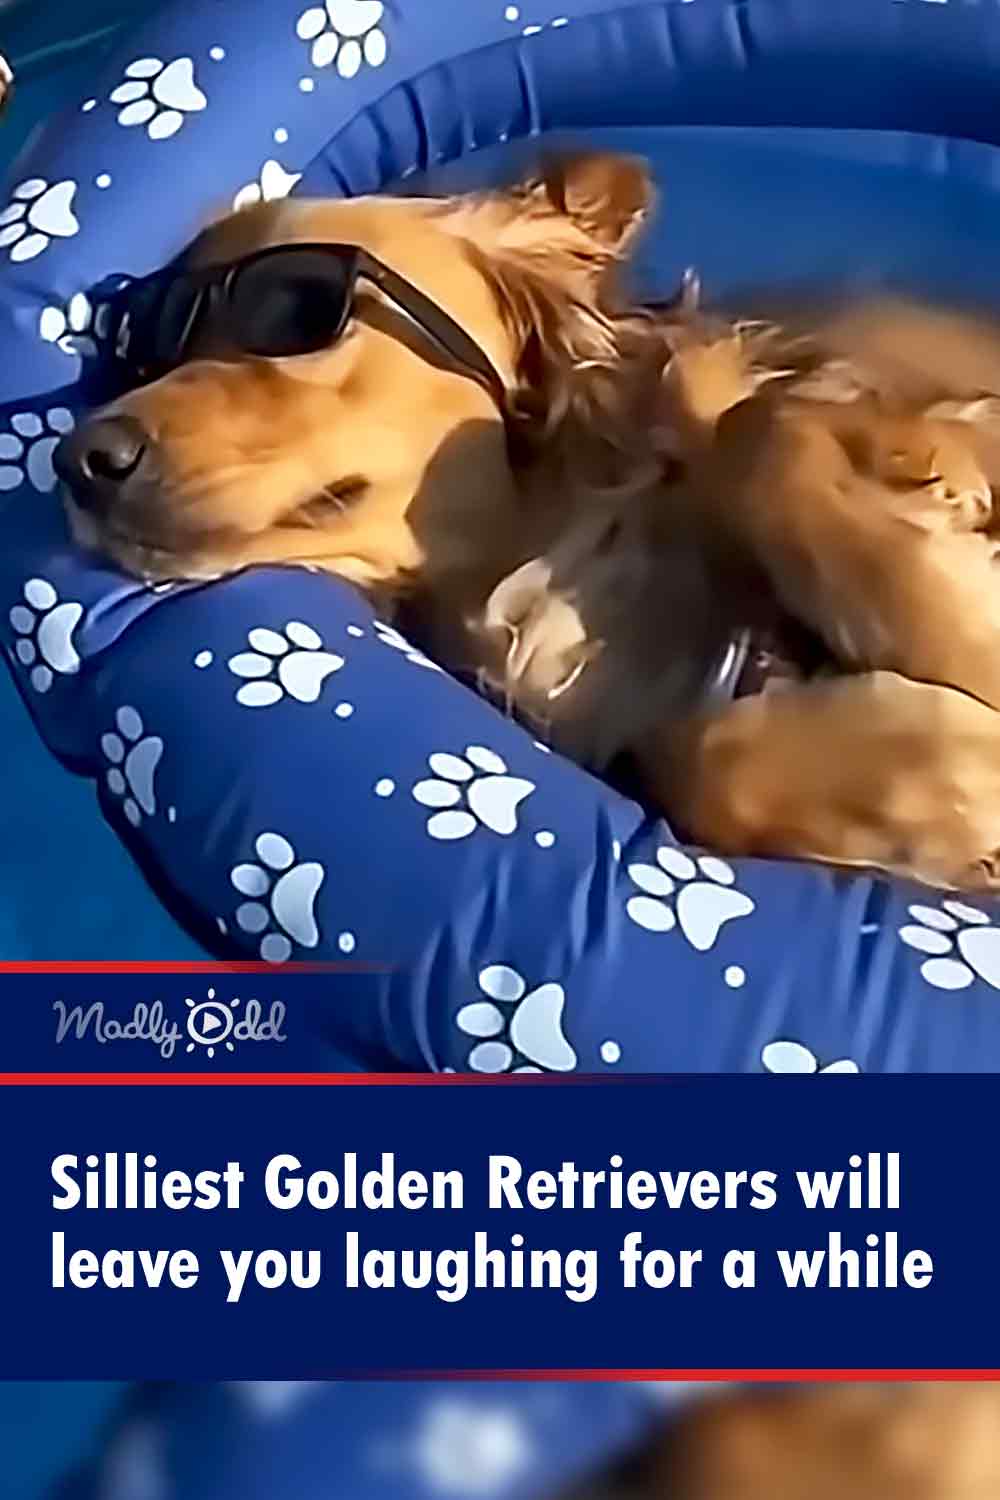 Silliest Golden Retrievers will leave you laughing for a while